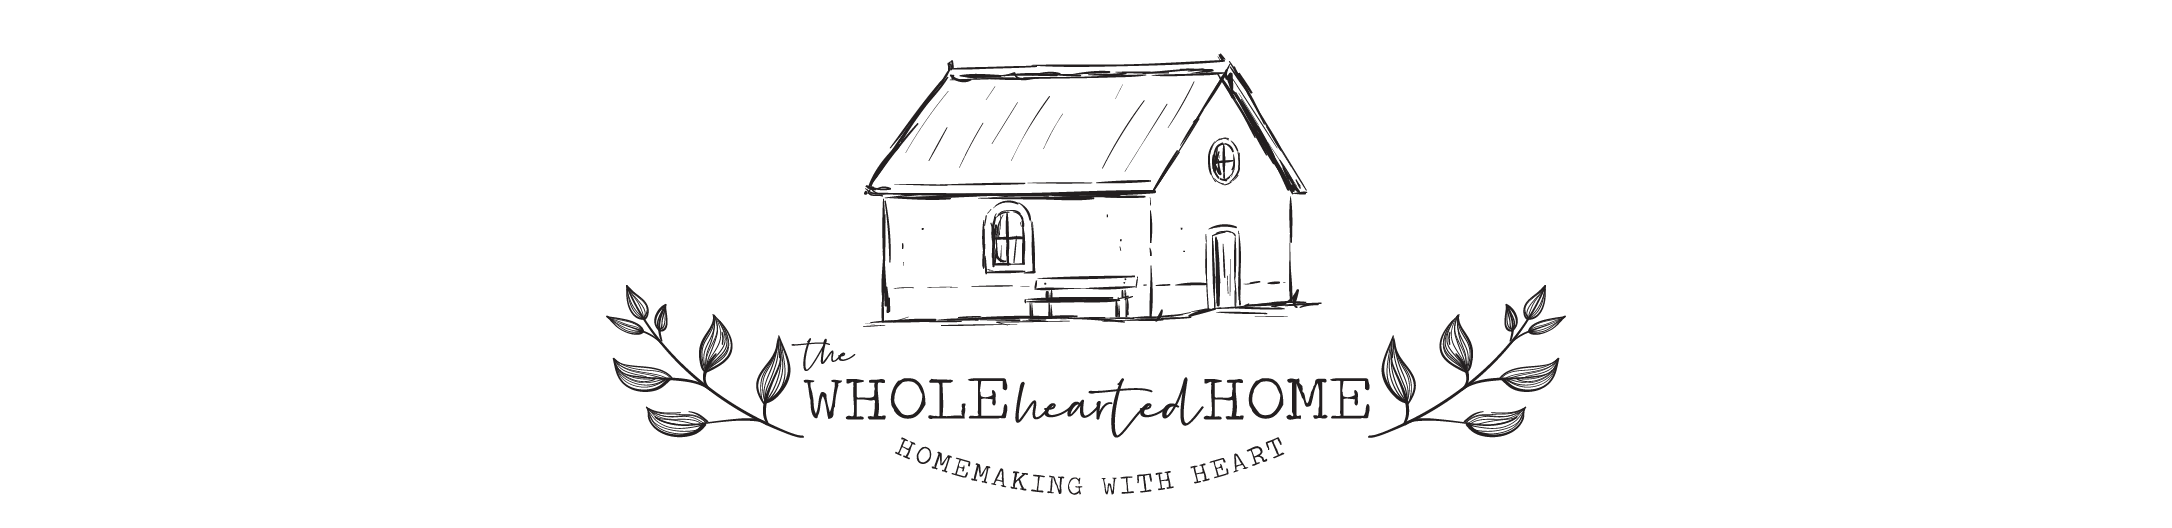 The Wholehearted Home Blog - House - HD Wallpaper 